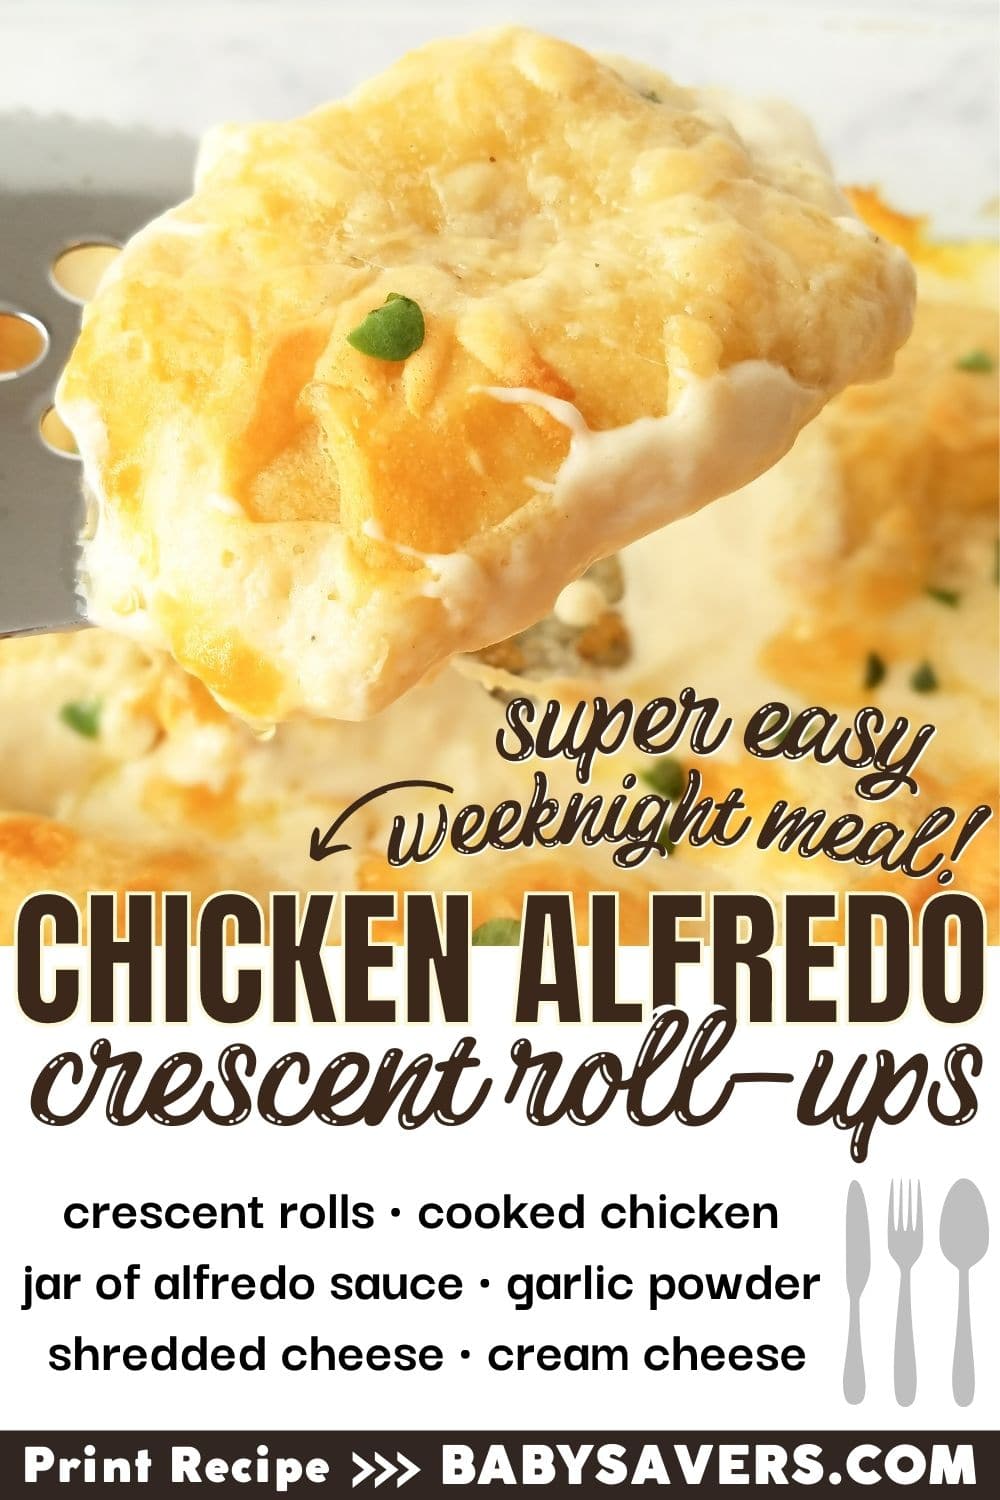 image for a quick chicken alfredo crescent roll-up recipe, highlighting the ingredients and simplicity of preparation, perfect for busy families, with a link to print the recipe from babysavers.com